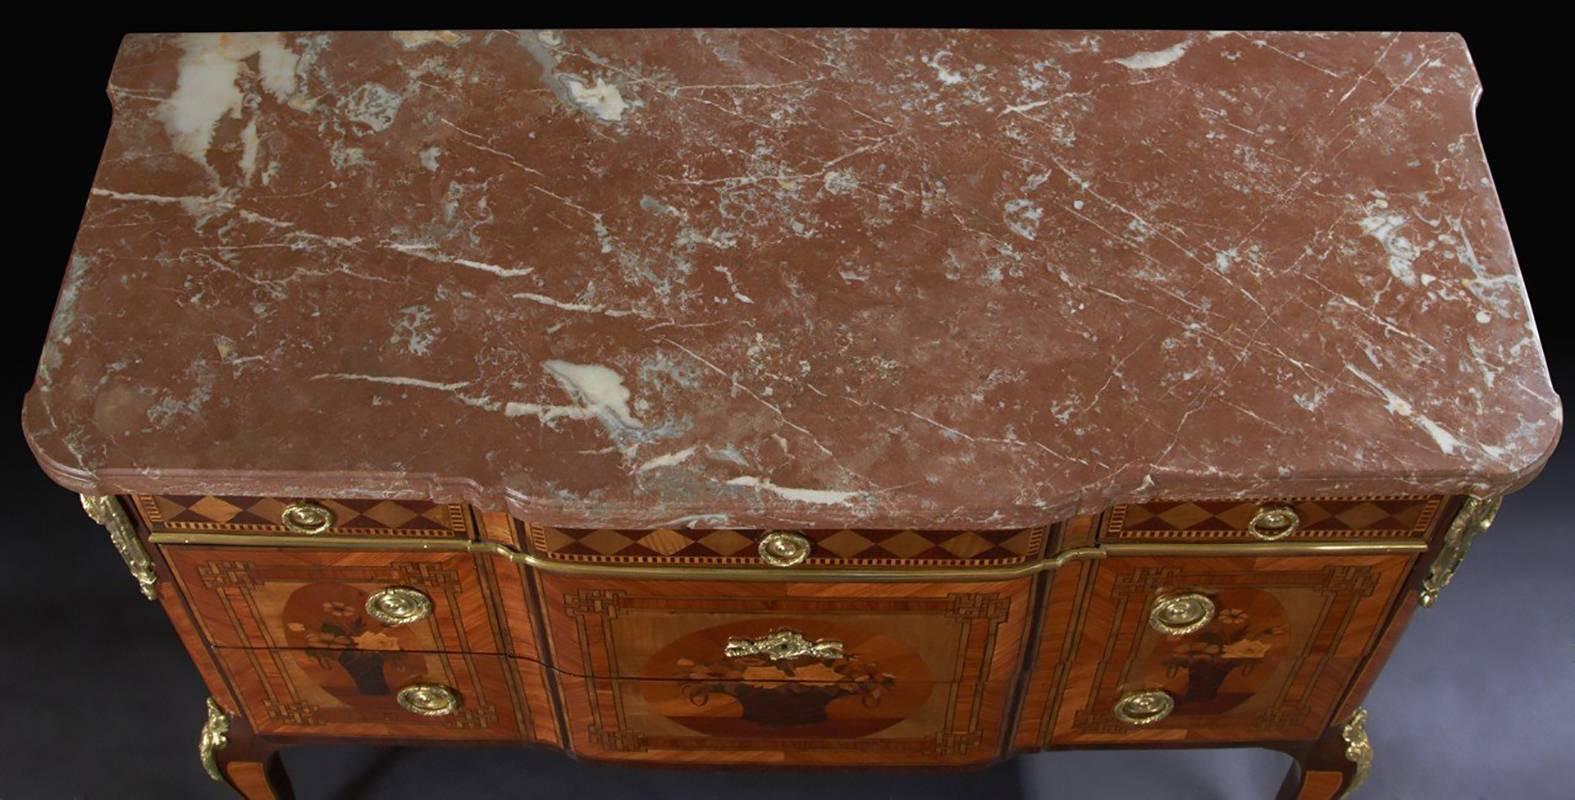 Louis XVI French Louis XV / XVI Transitional Marble Top Break Front Marquetry Commode